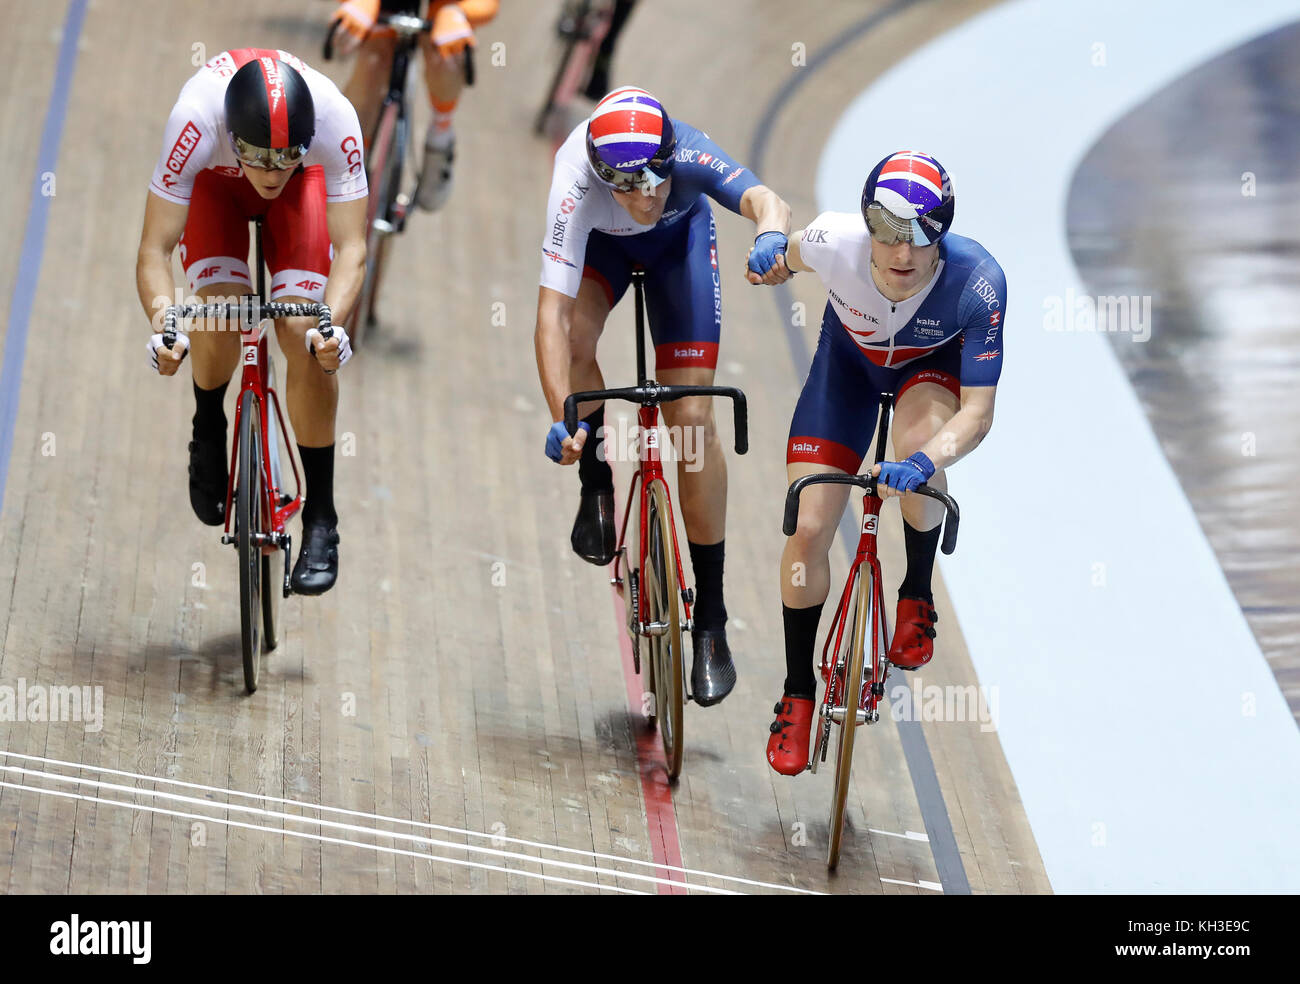 Great Britain's Mark Stewart (right) and Chris Latham in action during the Men's Madison Final, during day three of the TISSOT UCI Track Cycling World Cup at the HSBC UK National Cycling Centre, Manchester. Stock Photo